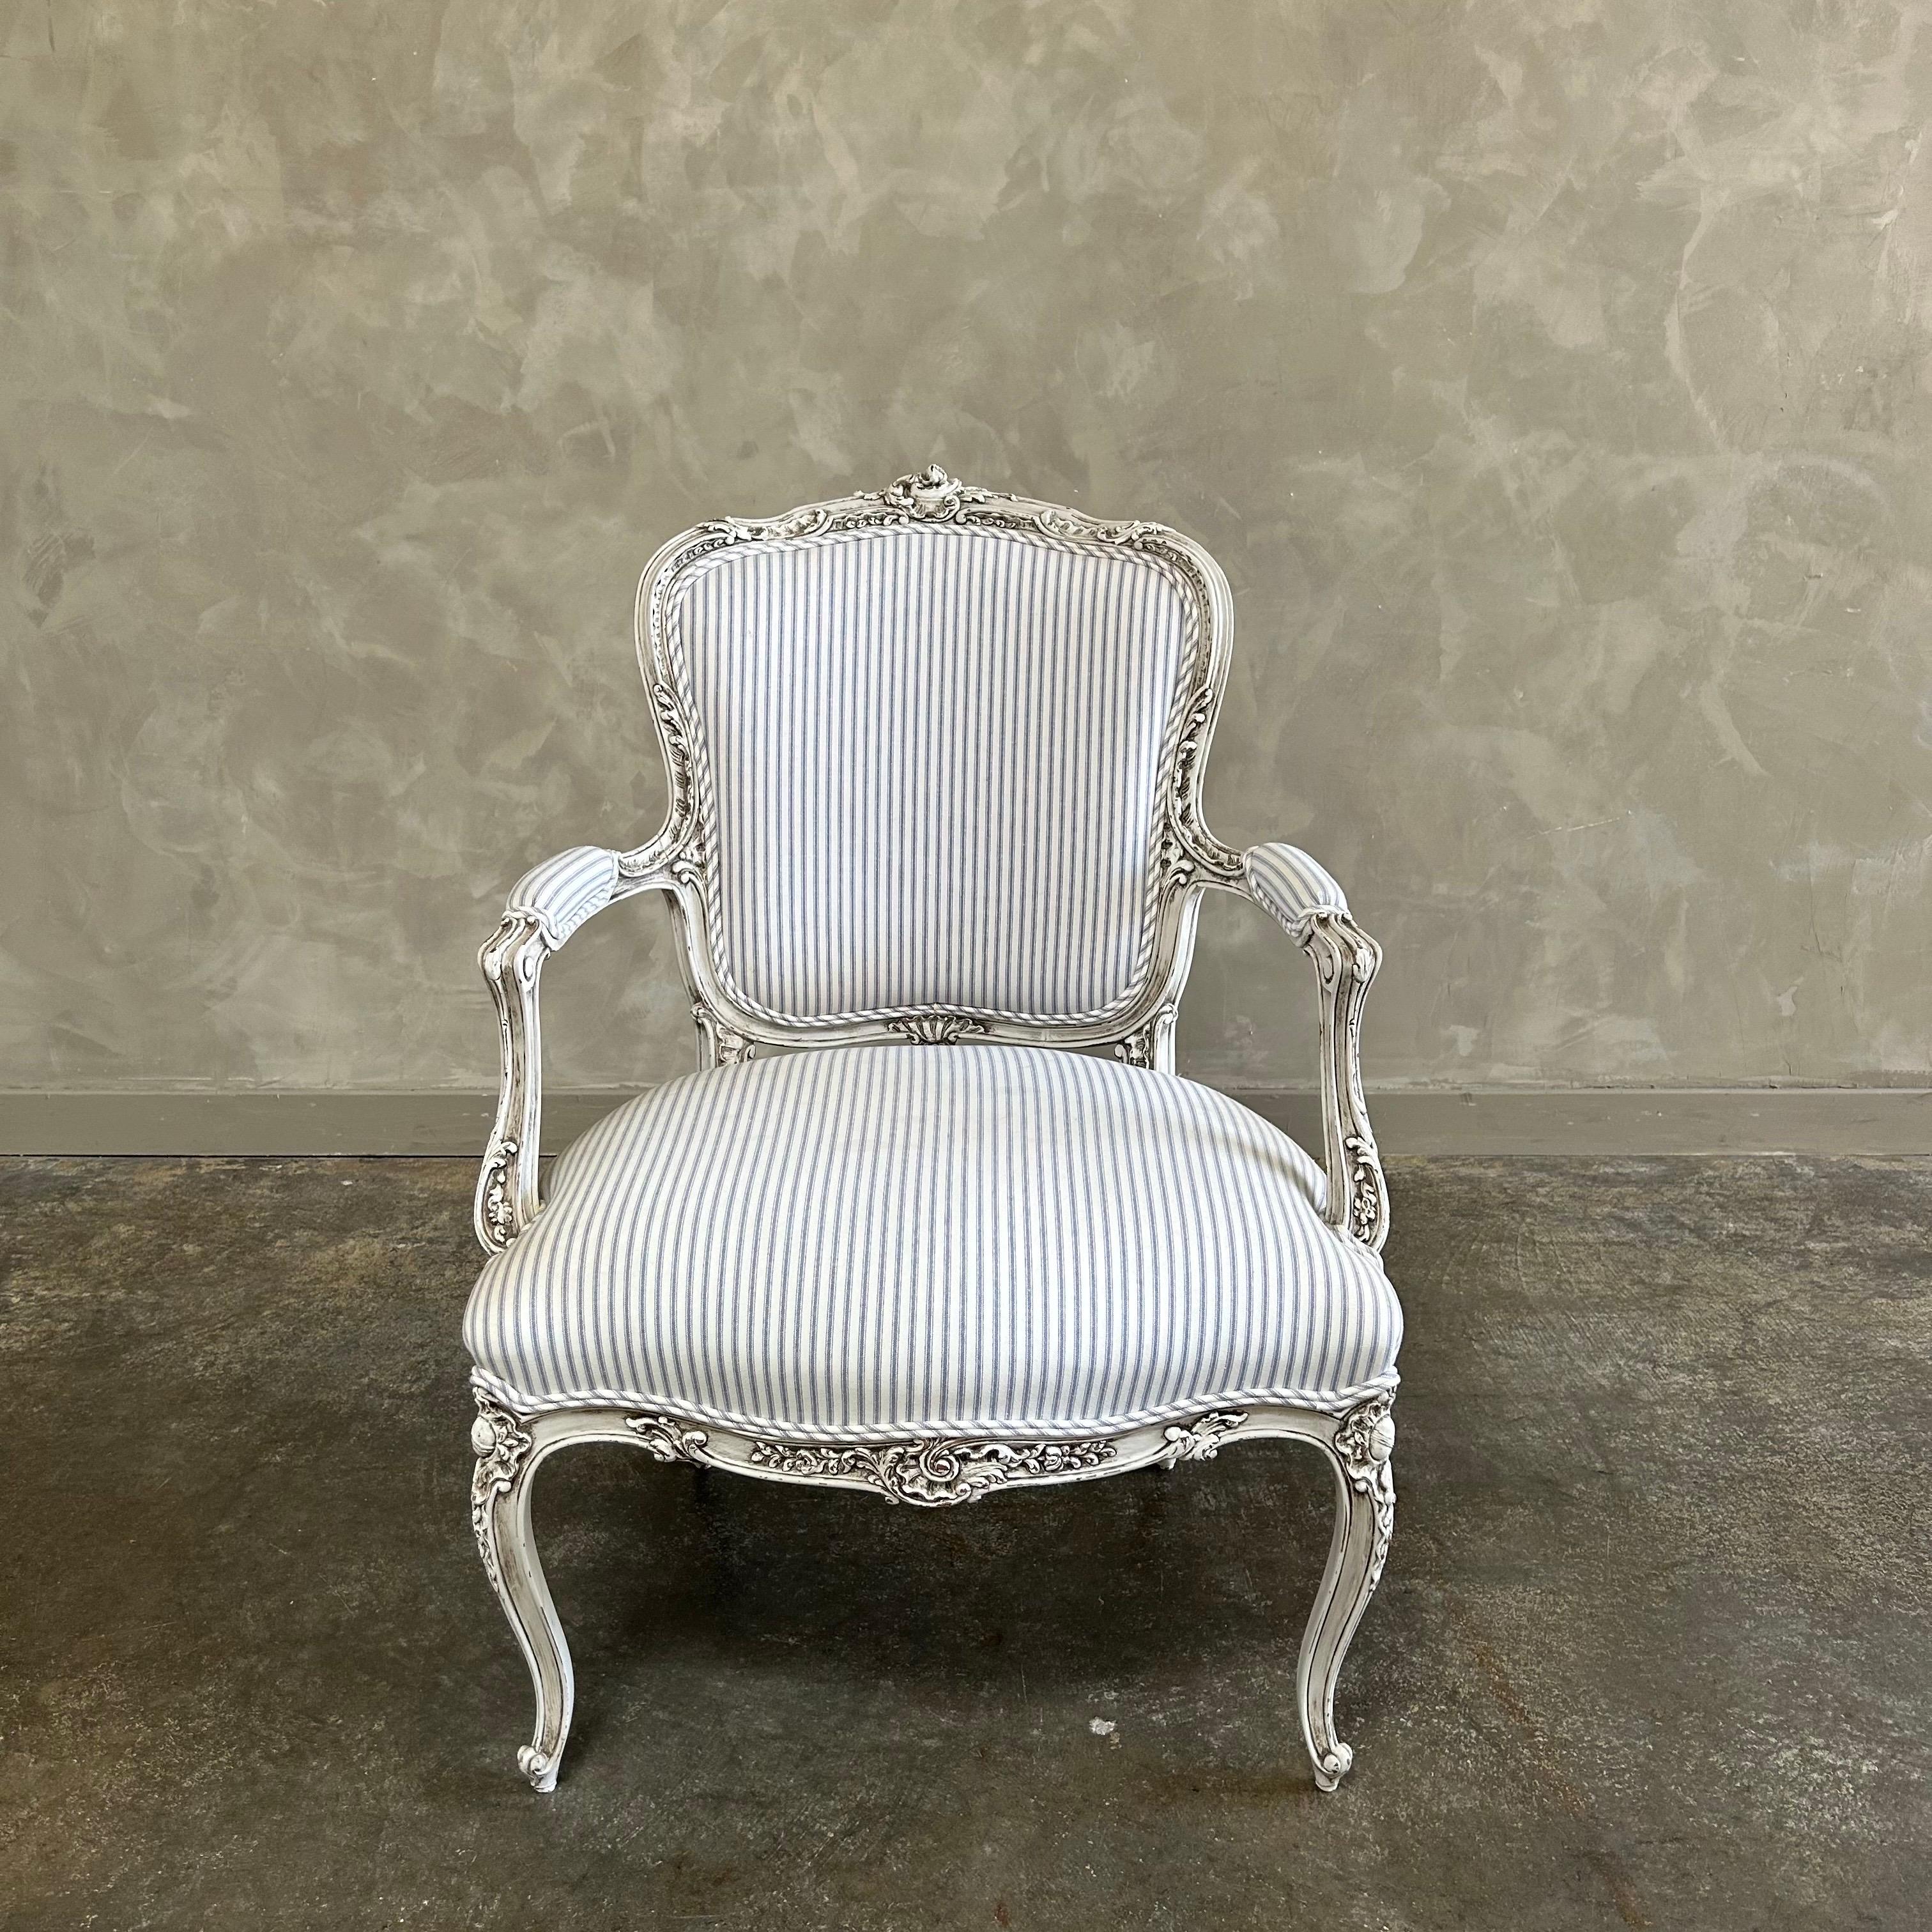 Antique French Louis XV Style chair. painted in a french oyster white finish with subtle distress edges, finished with an antique patina. Upholstered seat and back in a versatile stripe fabric, solid and sturdy ready for everyday use. 
Dimensions: